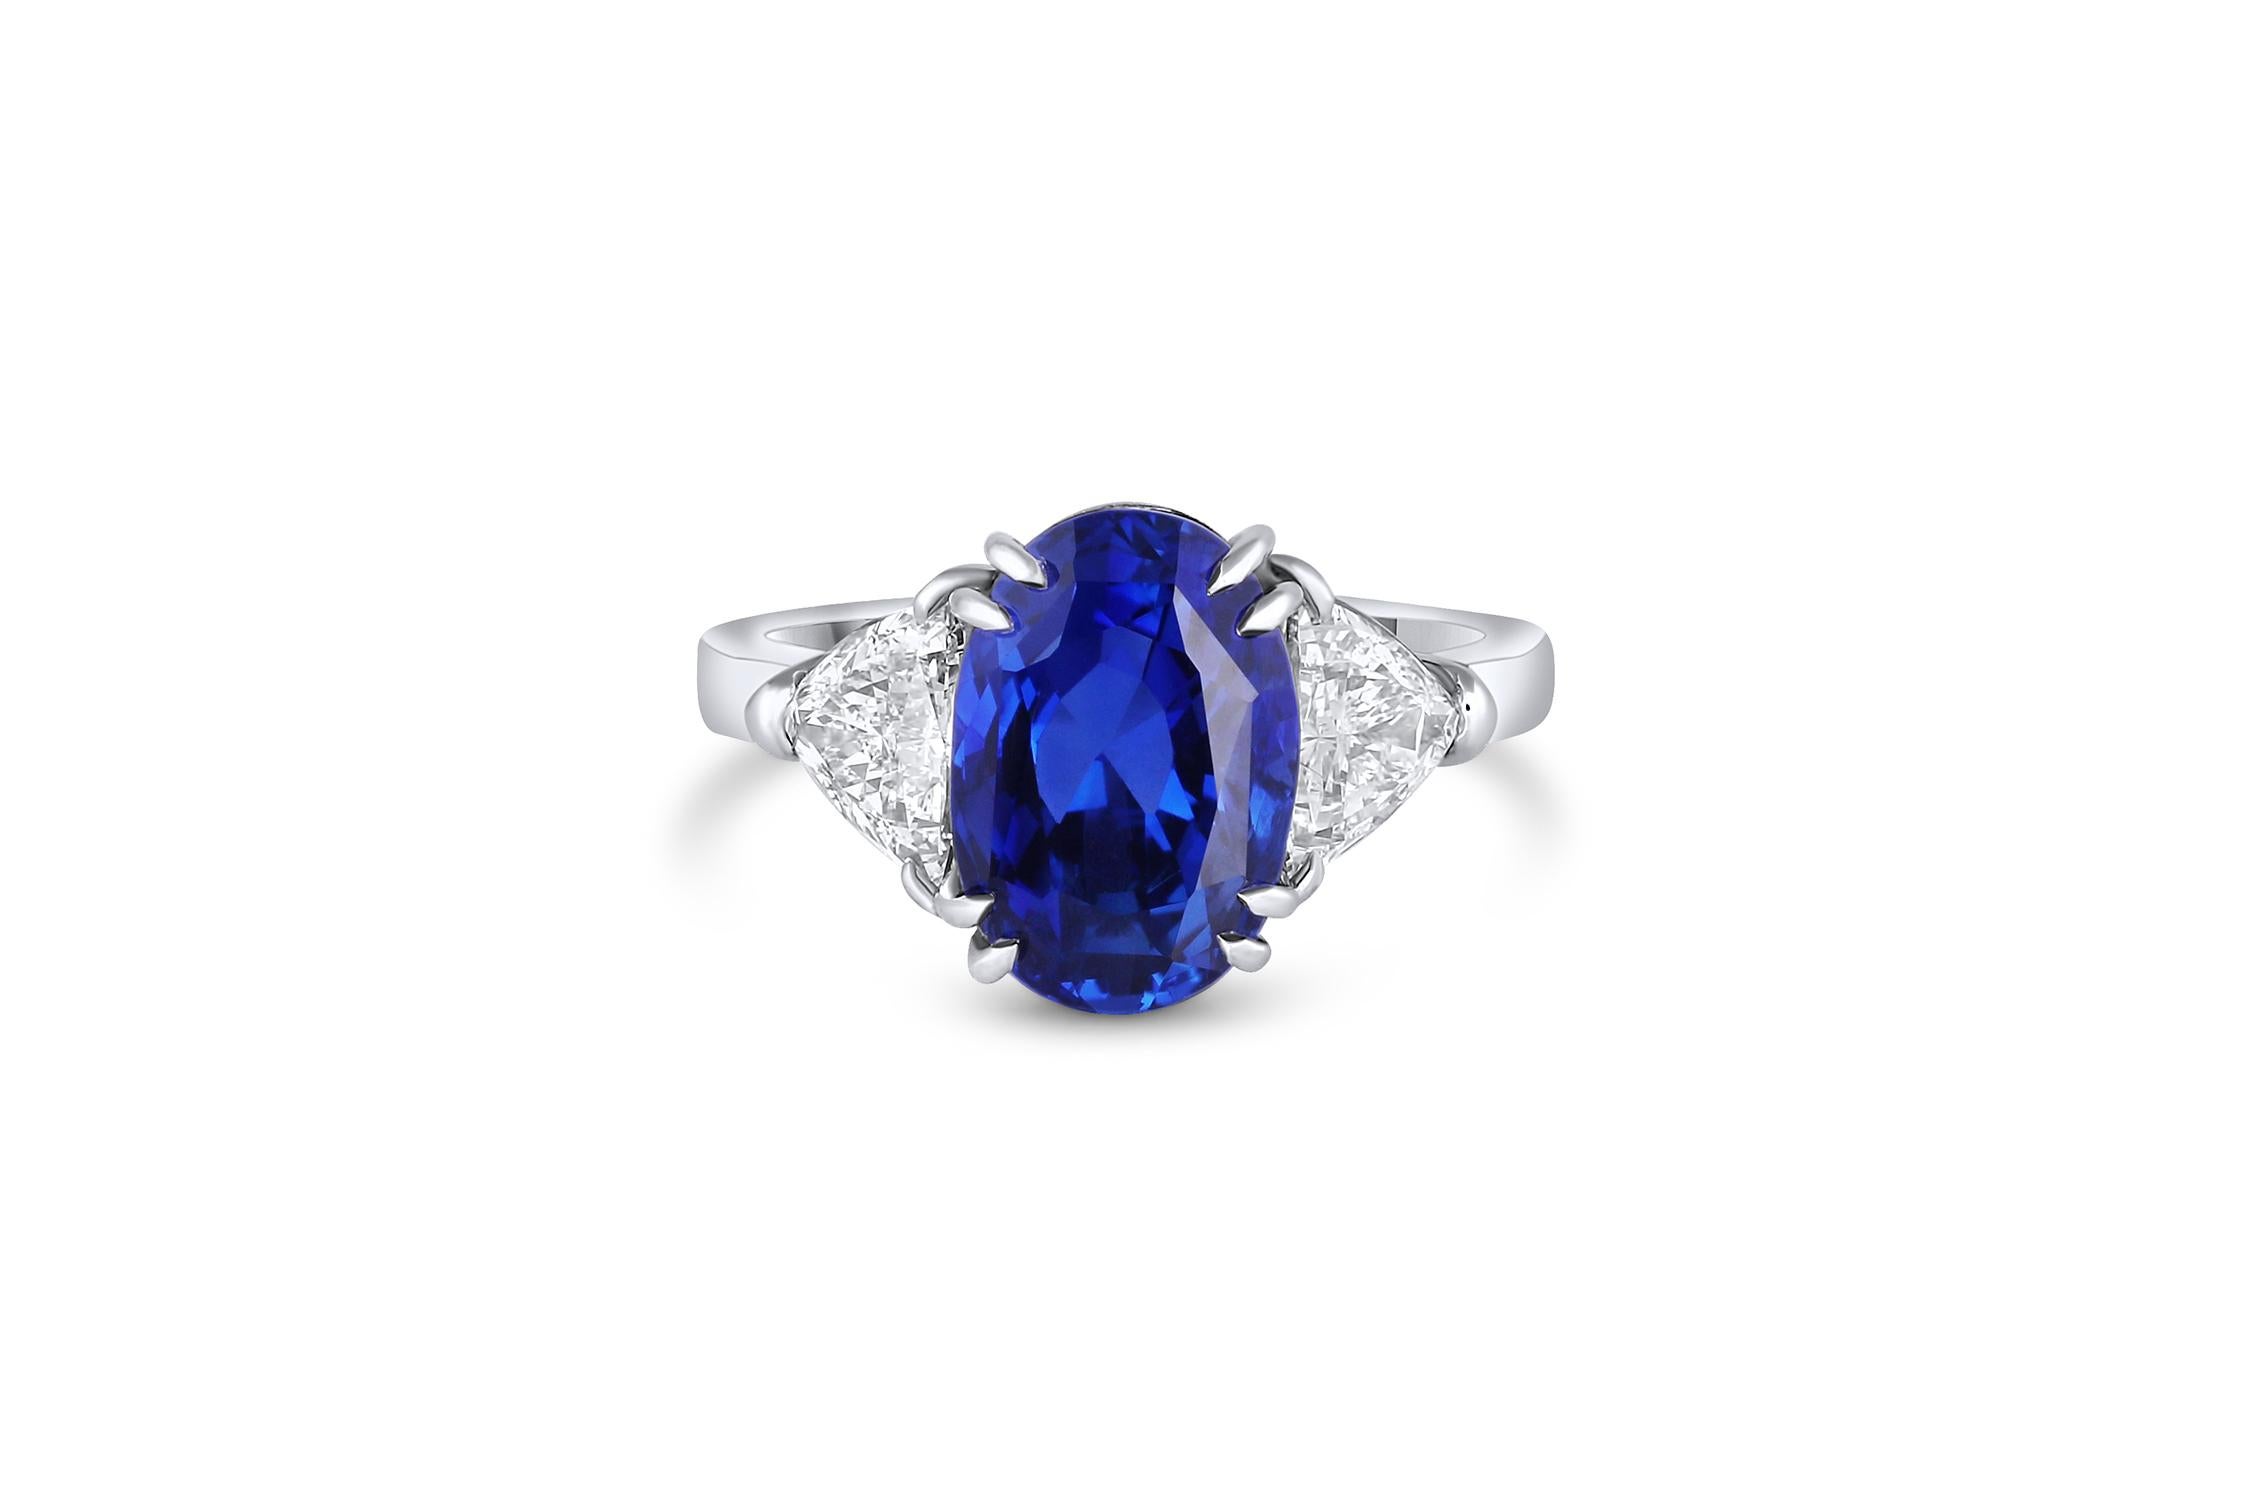 This extraordinary ring is crafted of platinum with a 5.23 carat natural unheated Madagascar sapphire. Features include two trillion cut diamonds weighing a carat total weight of 1.12 carats.